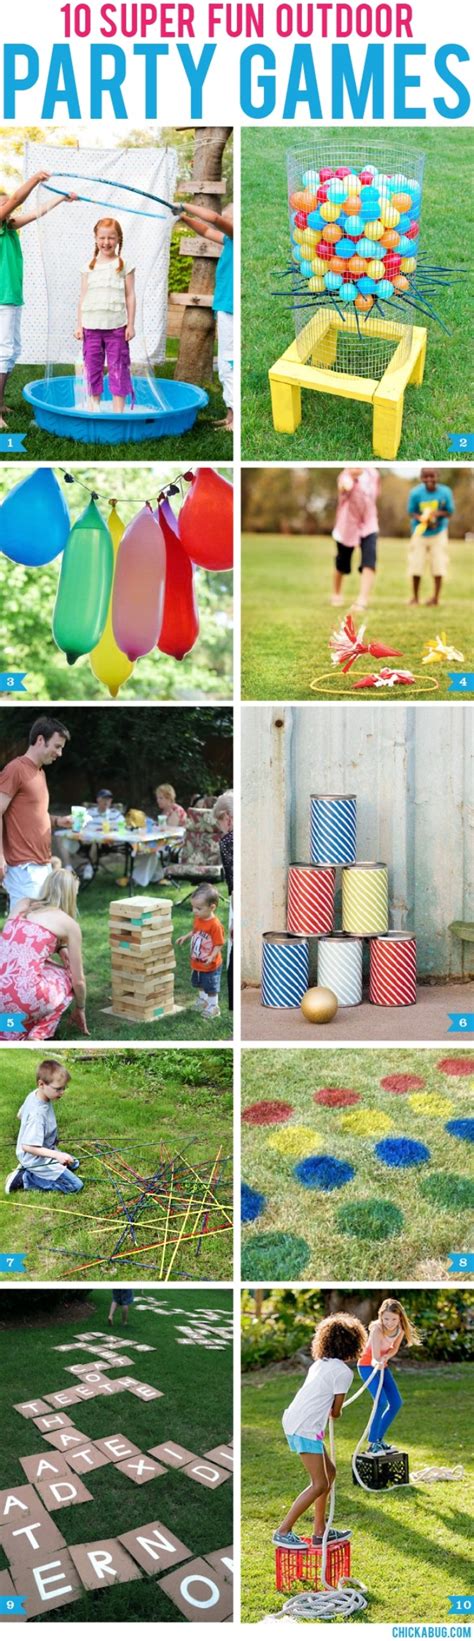 10 super fun diy outdoor games for labor day weekend